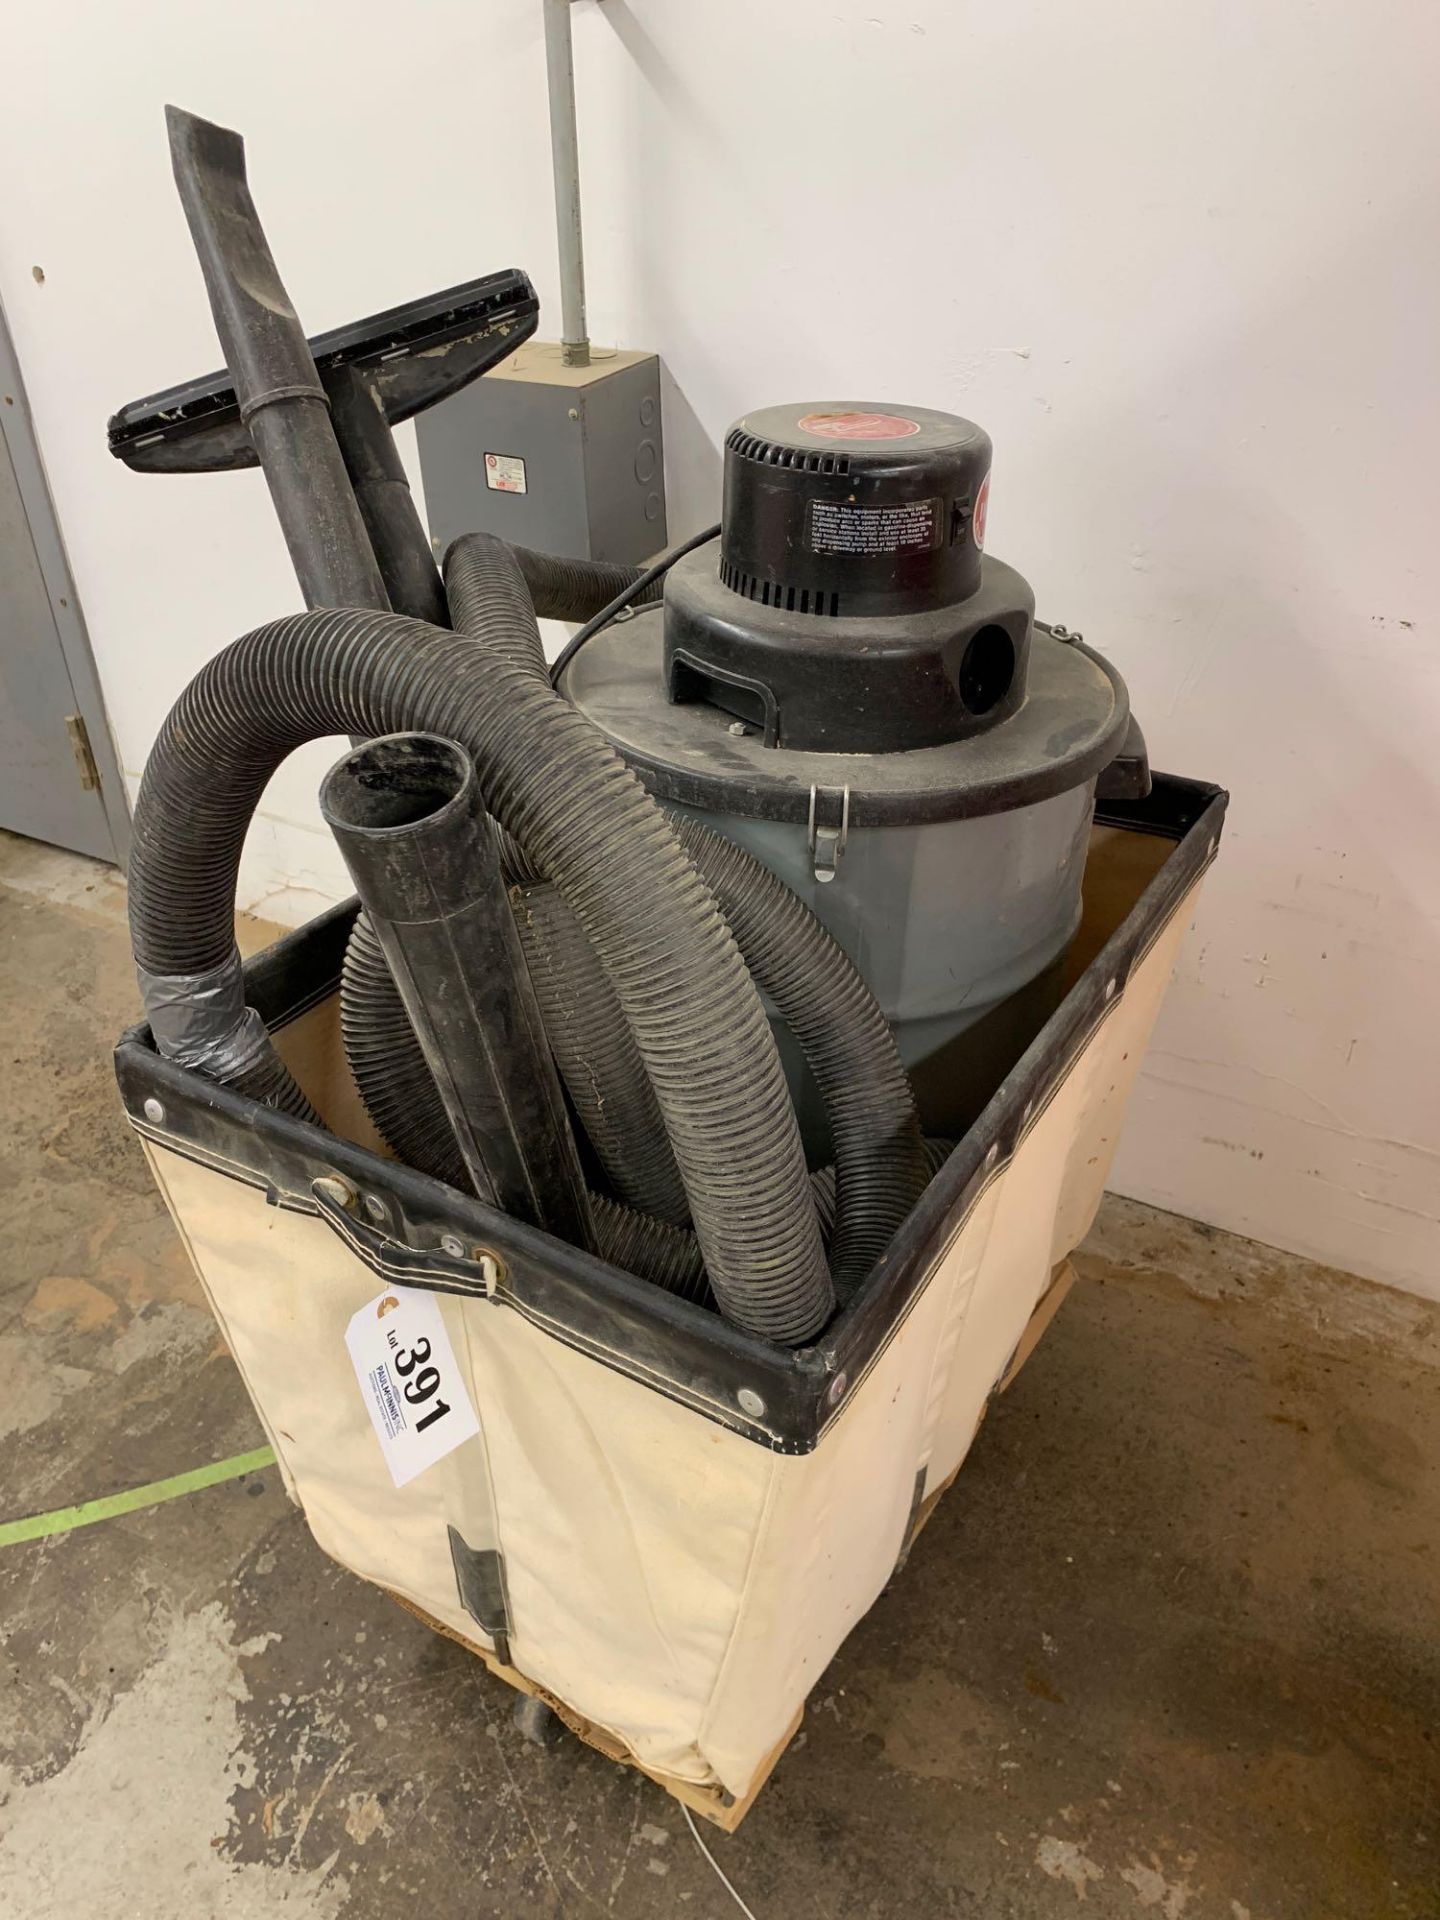 Rolling canvas cart with shop vac